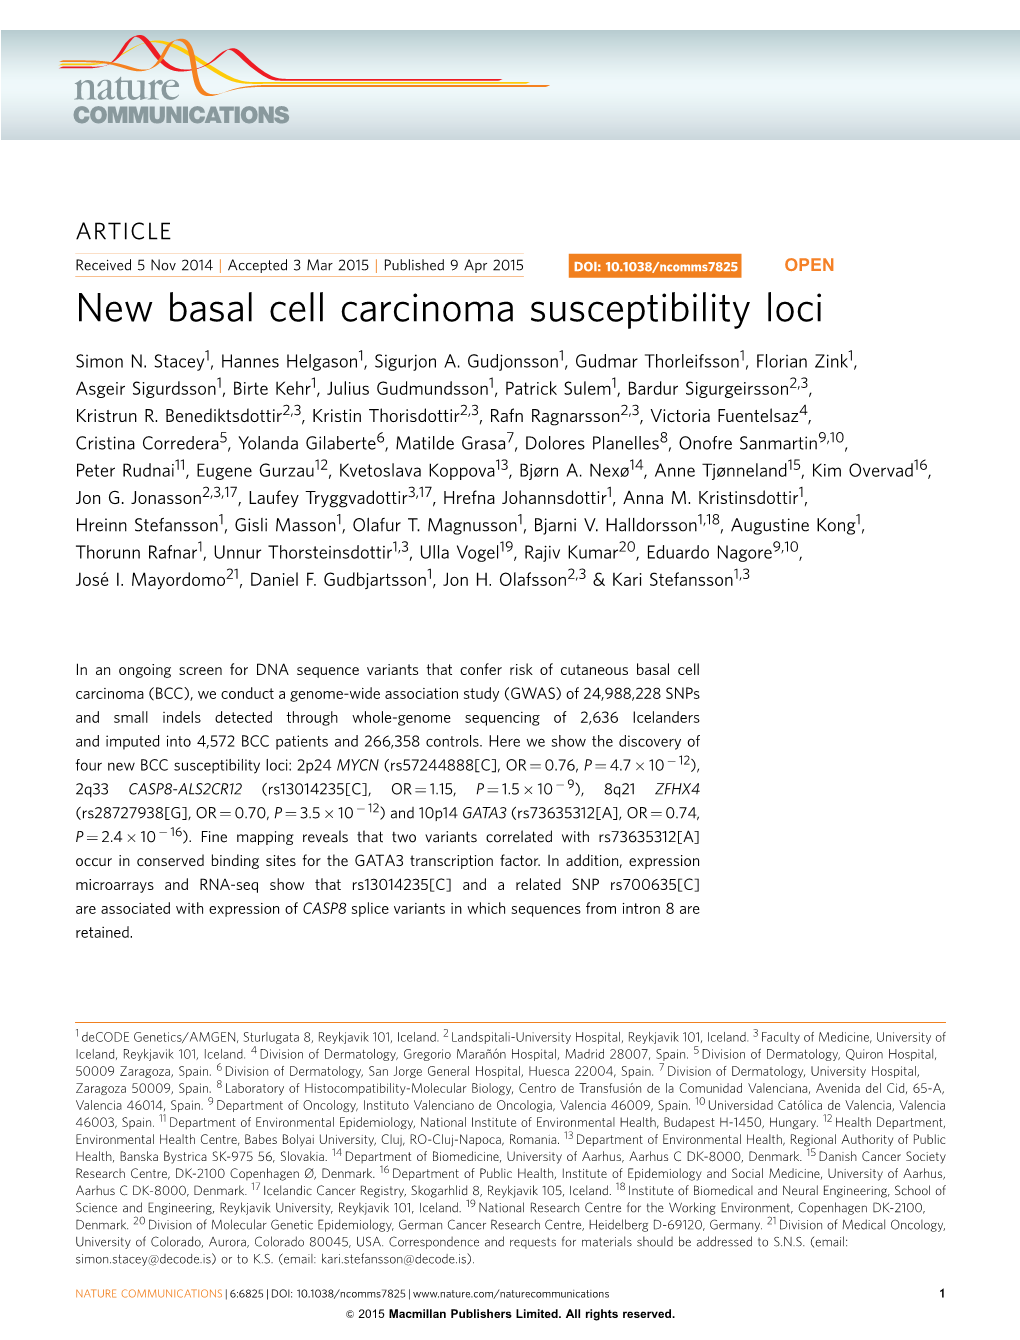 New Basal Cell Carcinoma Susceptibility Loci